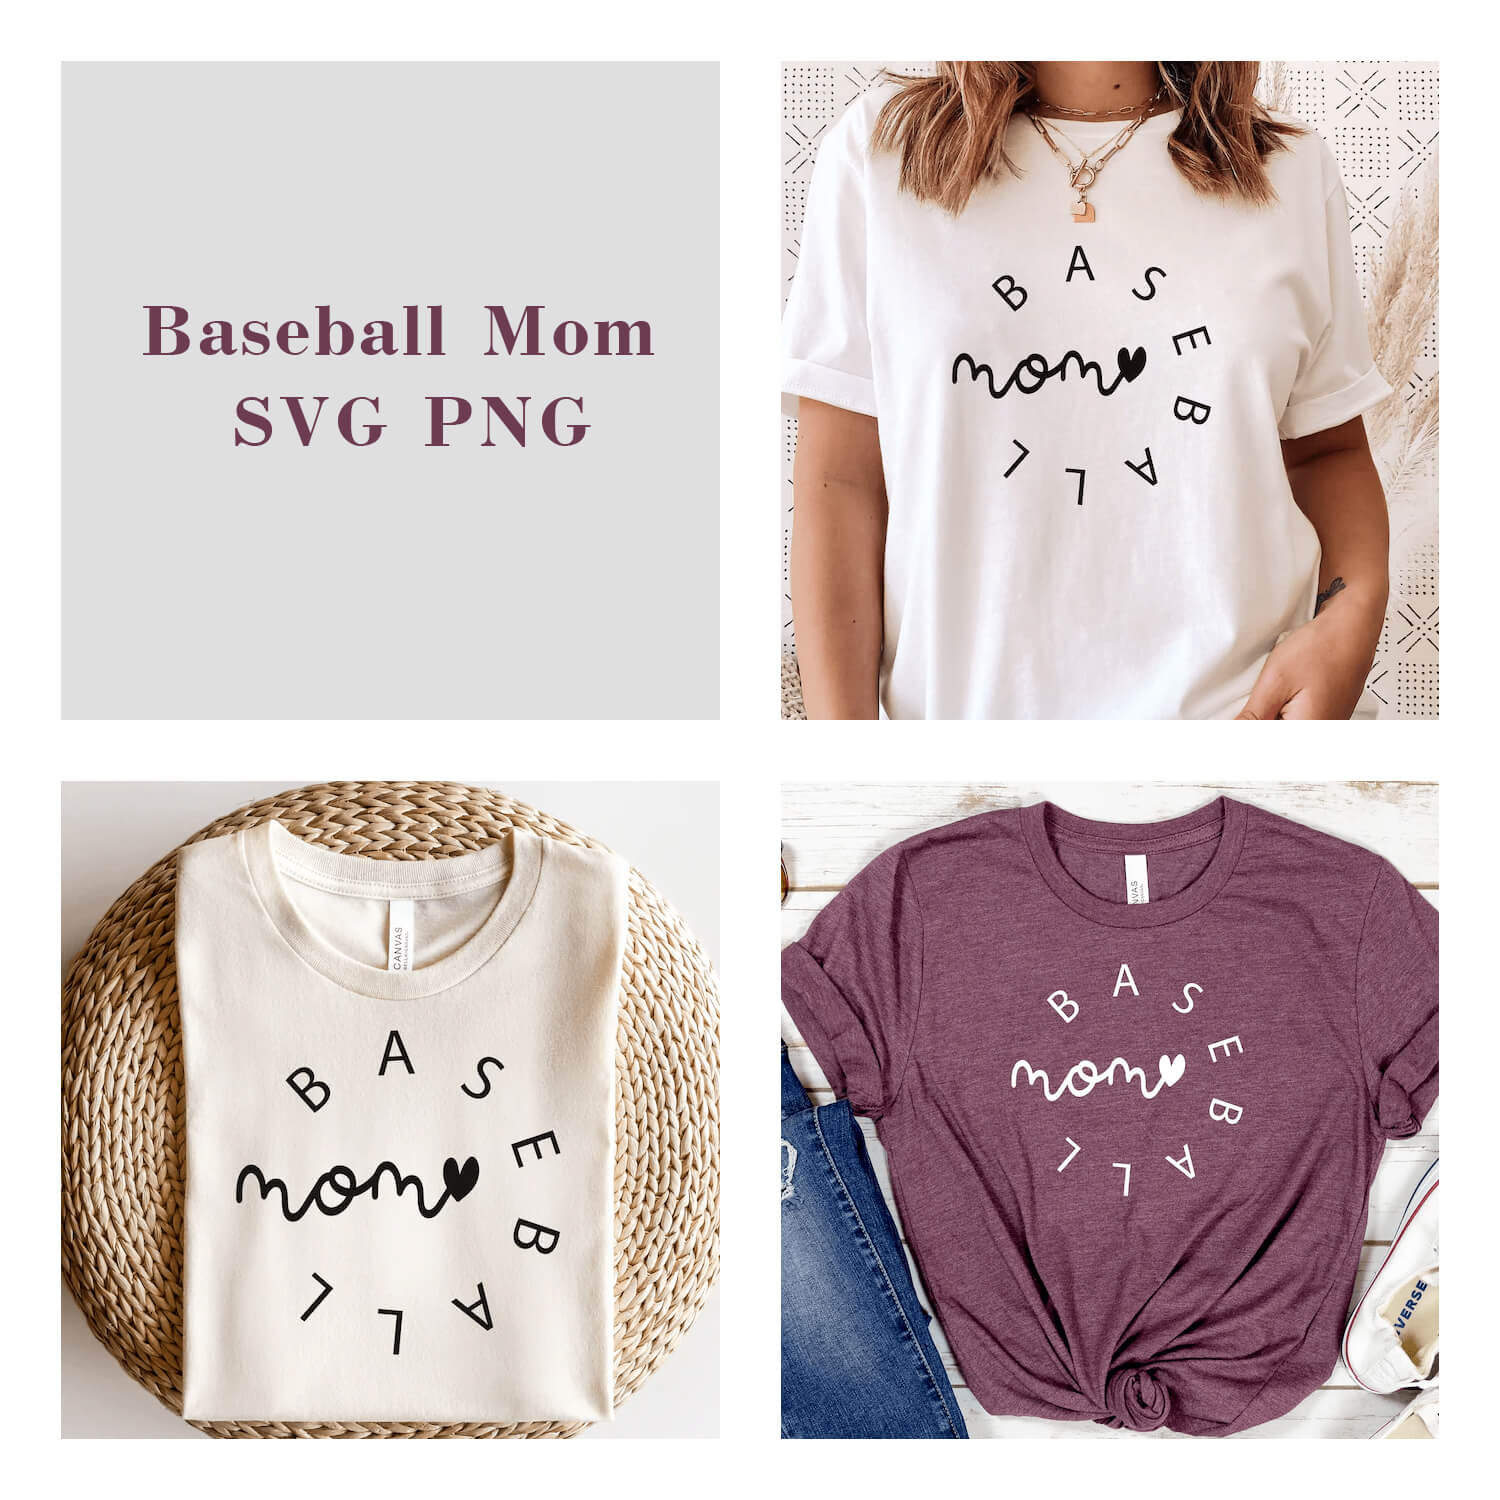 Four square pictures in one with the name of the product "Baseball mom svg png" and the logo on the T-shirts.